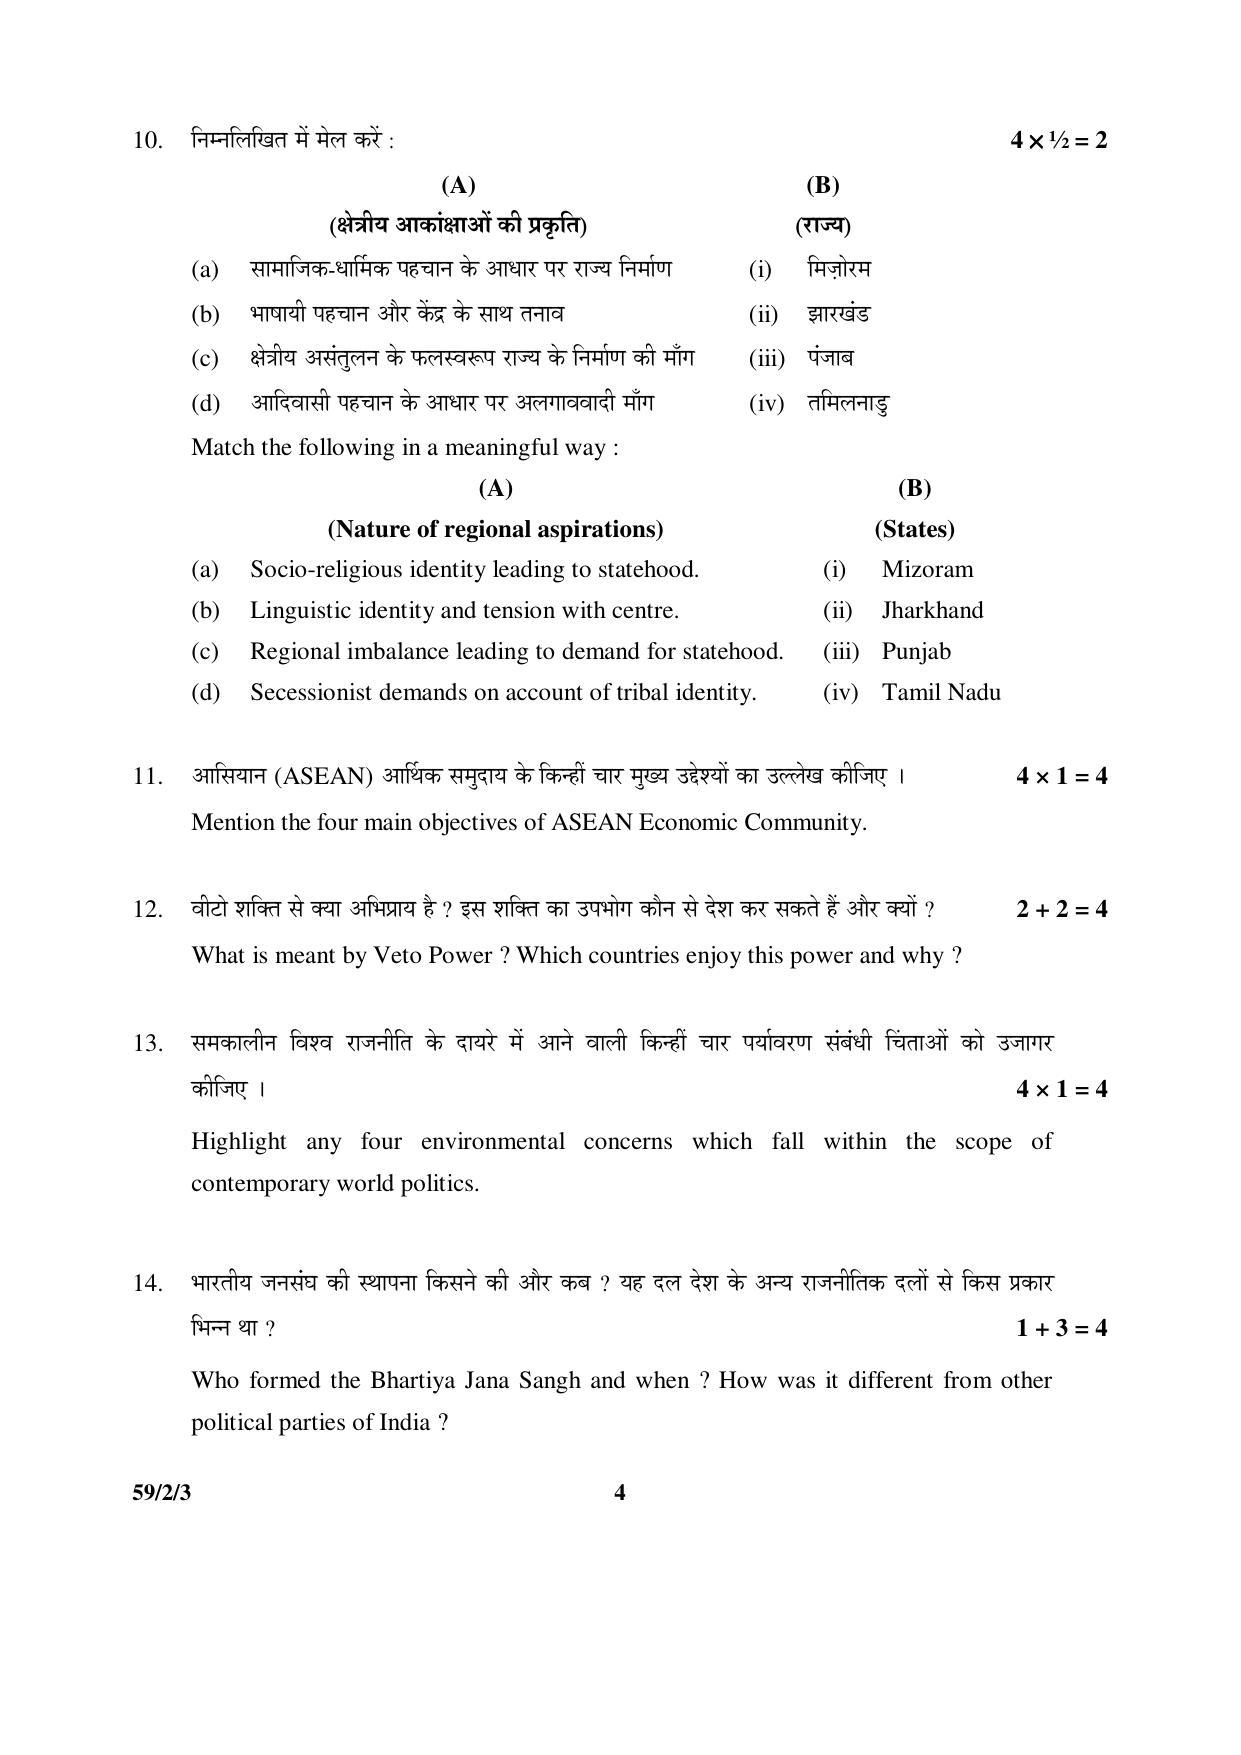 CBSE Class 12 59-2-3 _Political Science 2016 Question Paper - Page 4